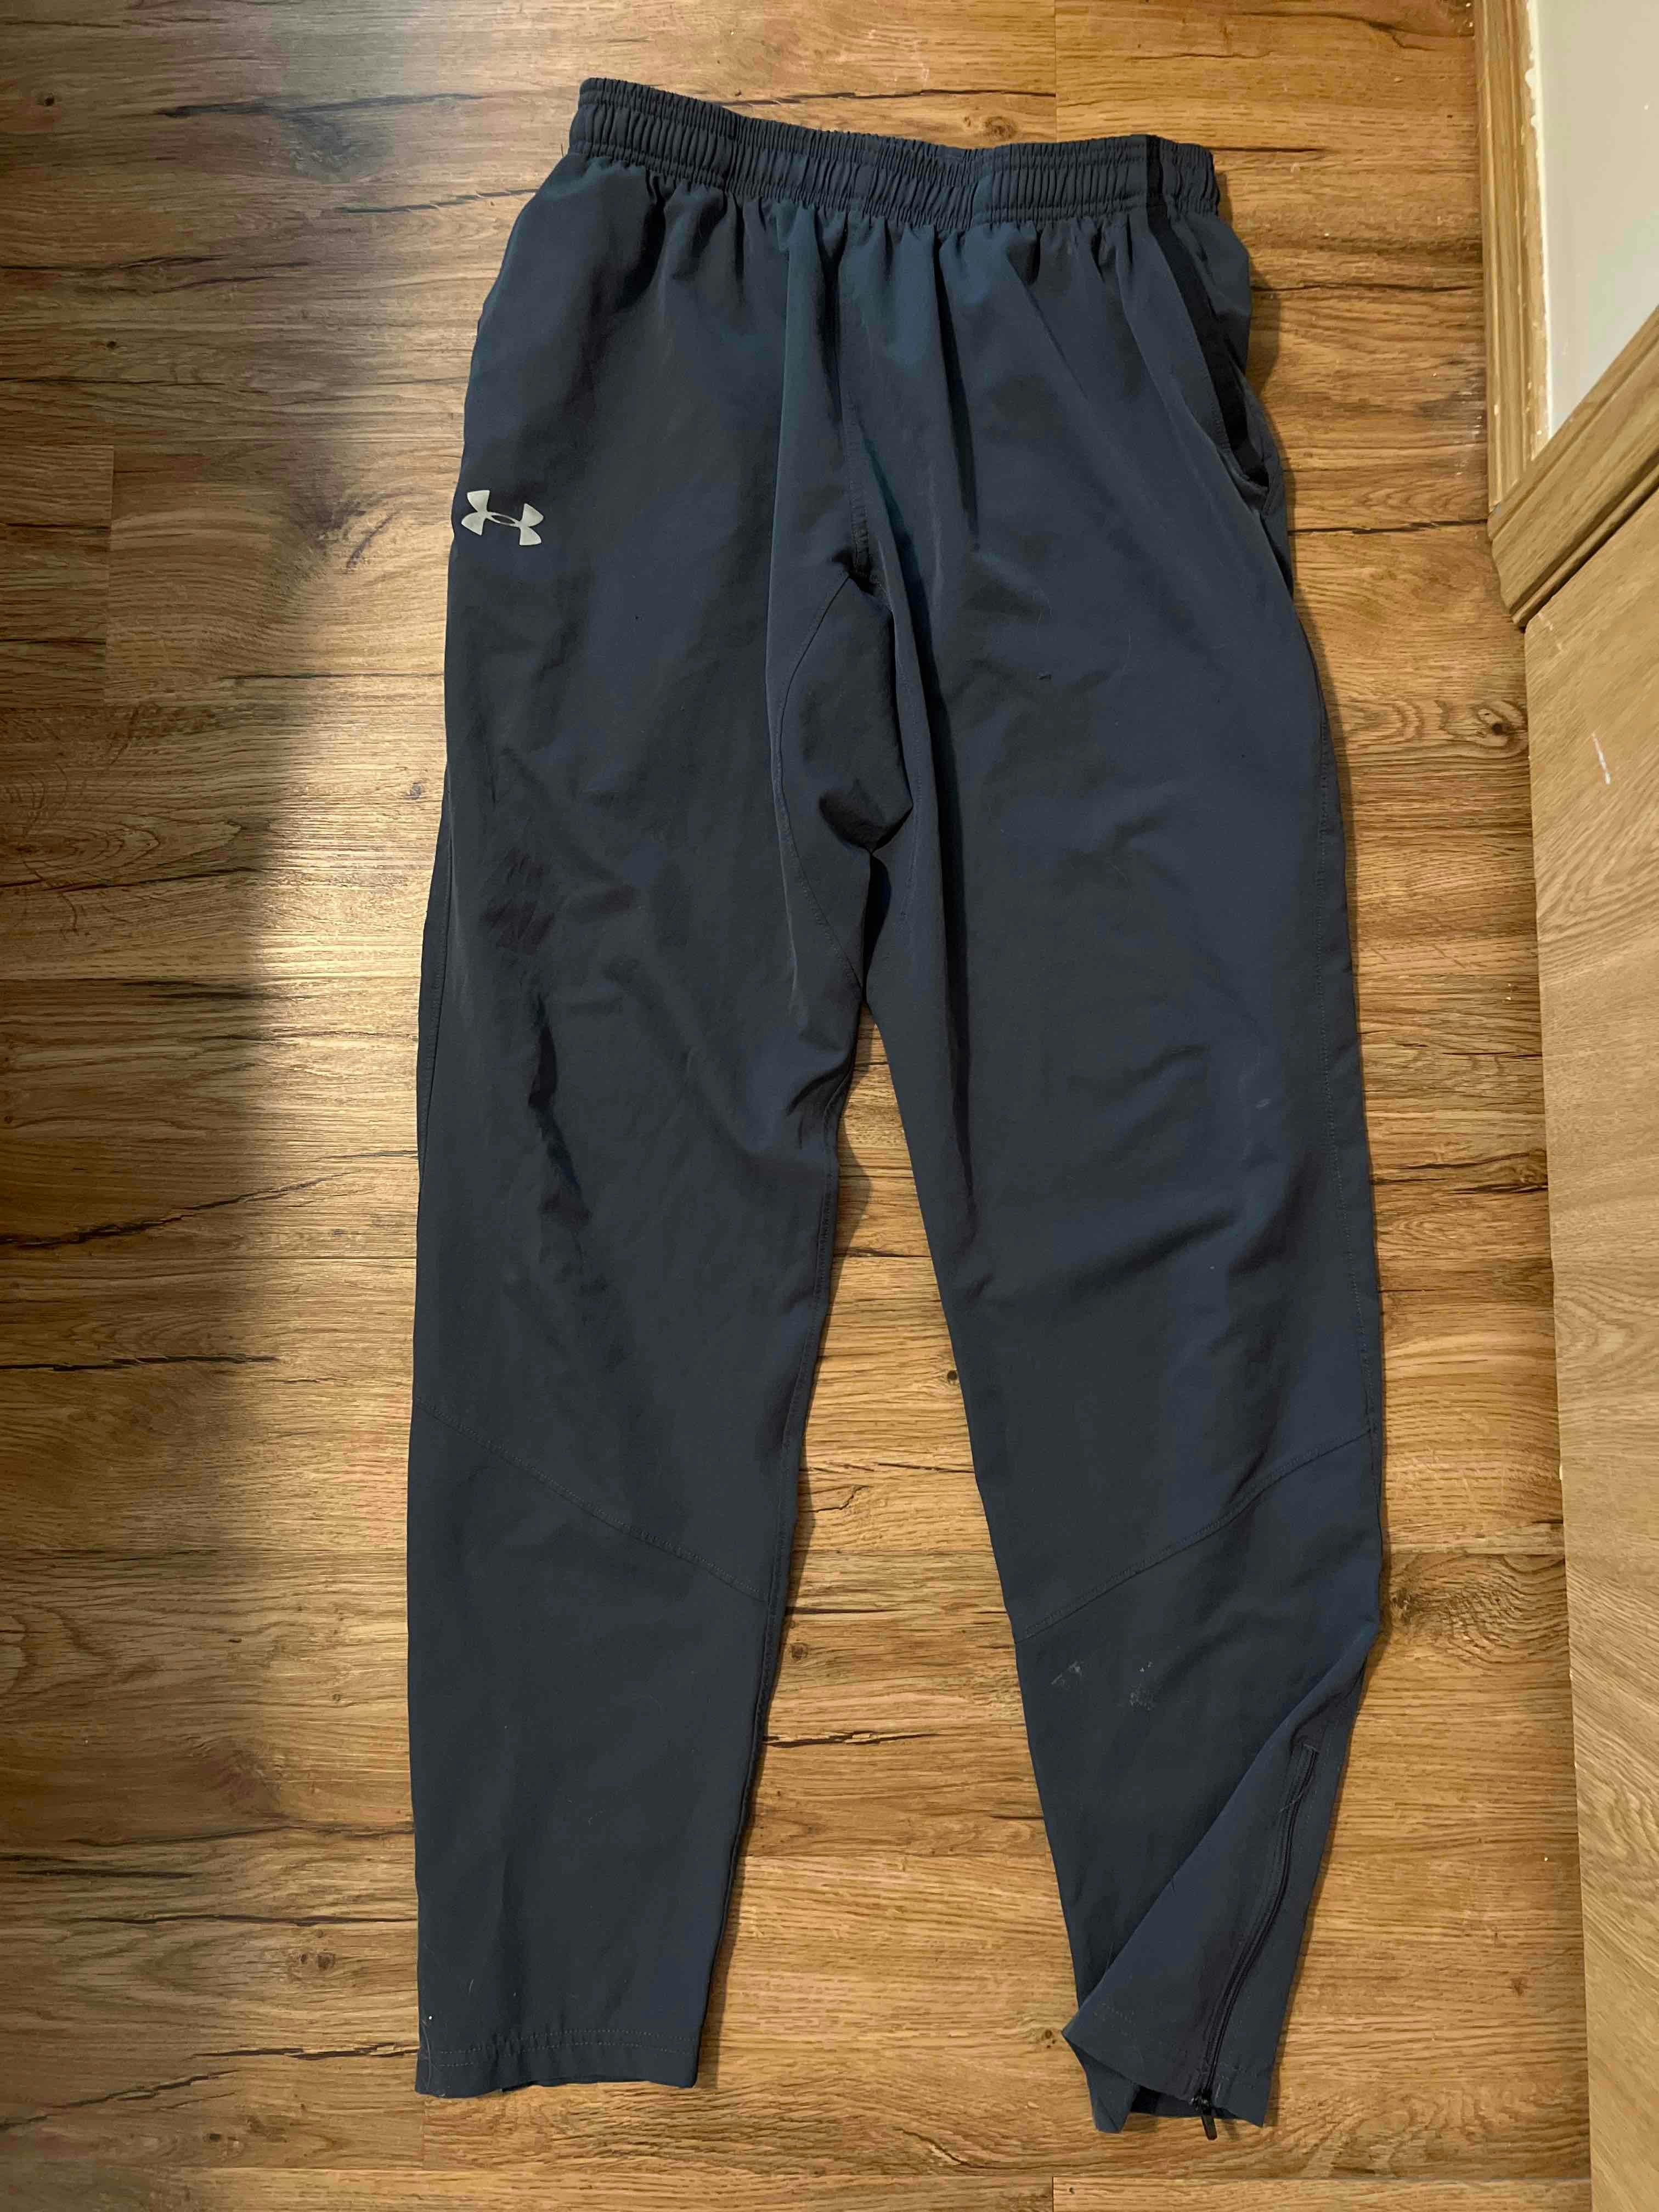  Under Armour Running Pants - Mens L